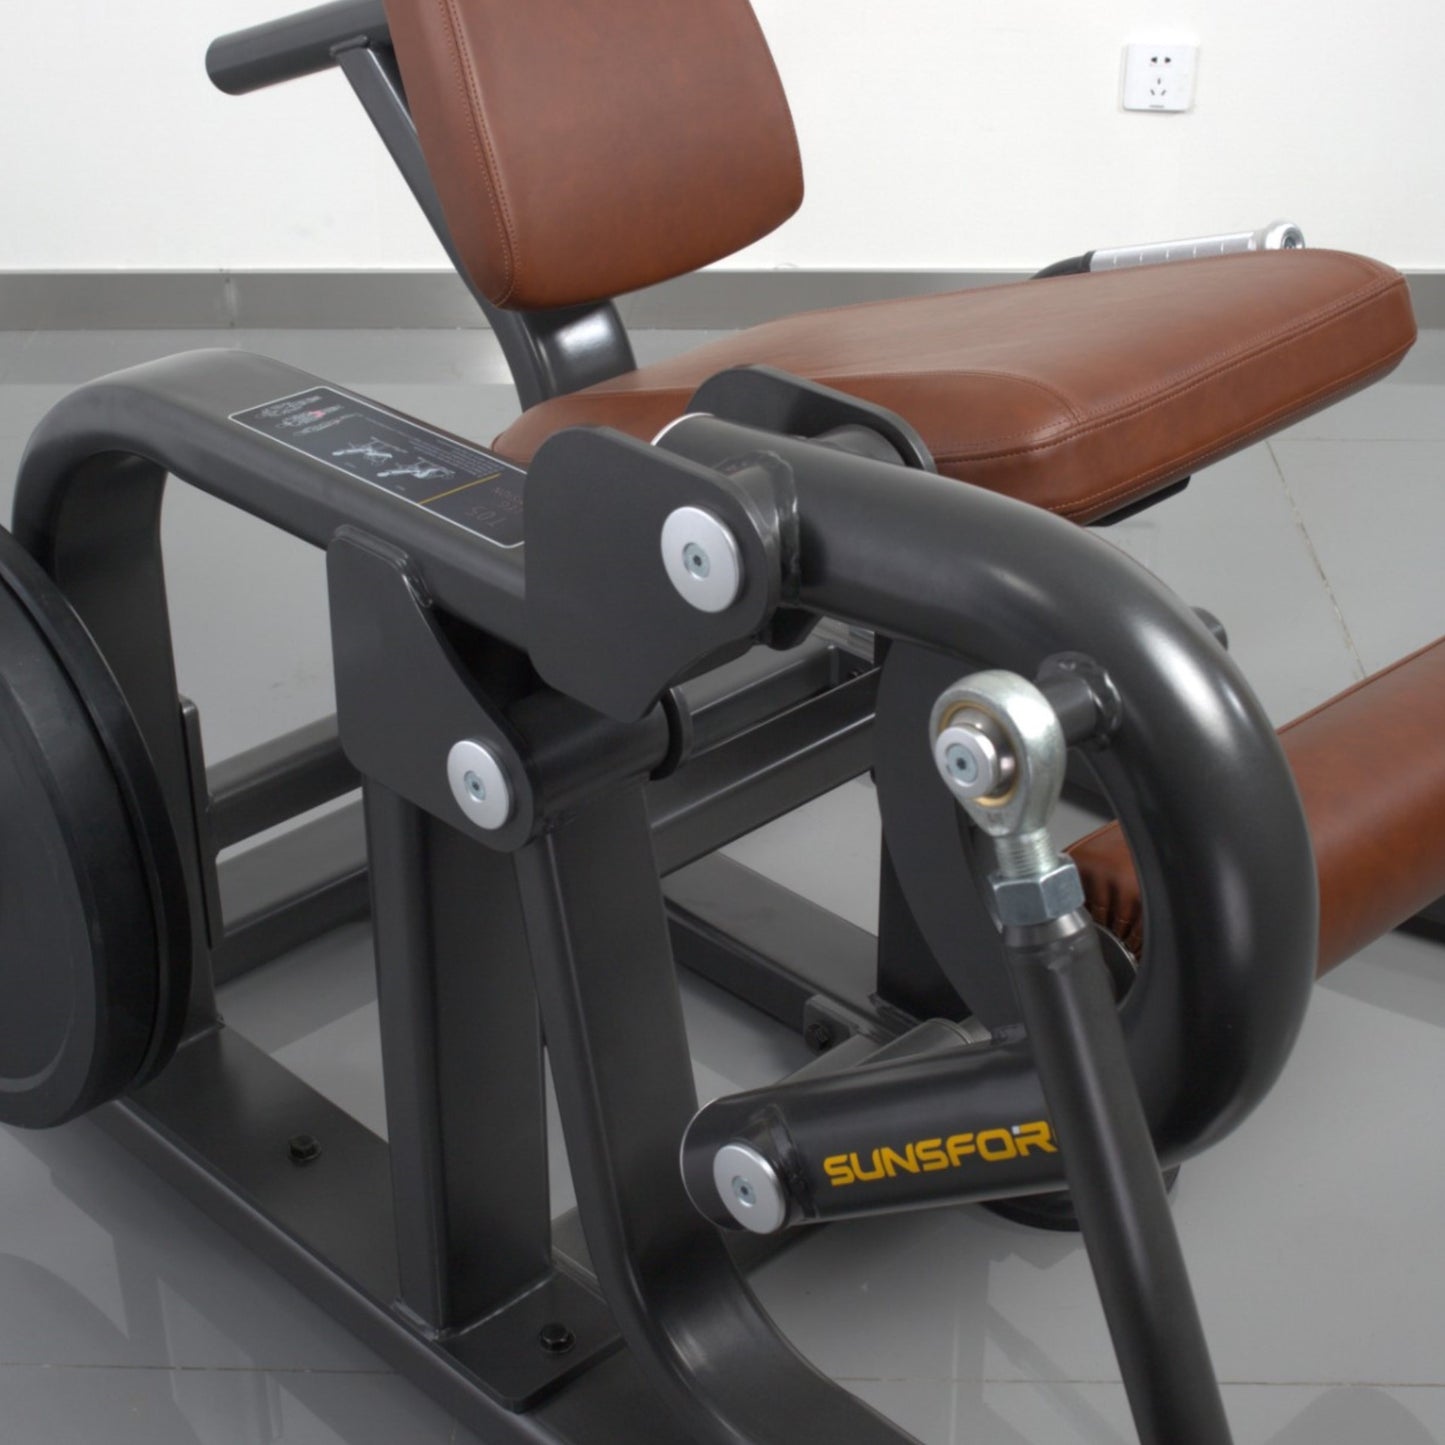 LEG EXTENSION SEATED PLATE LOADED